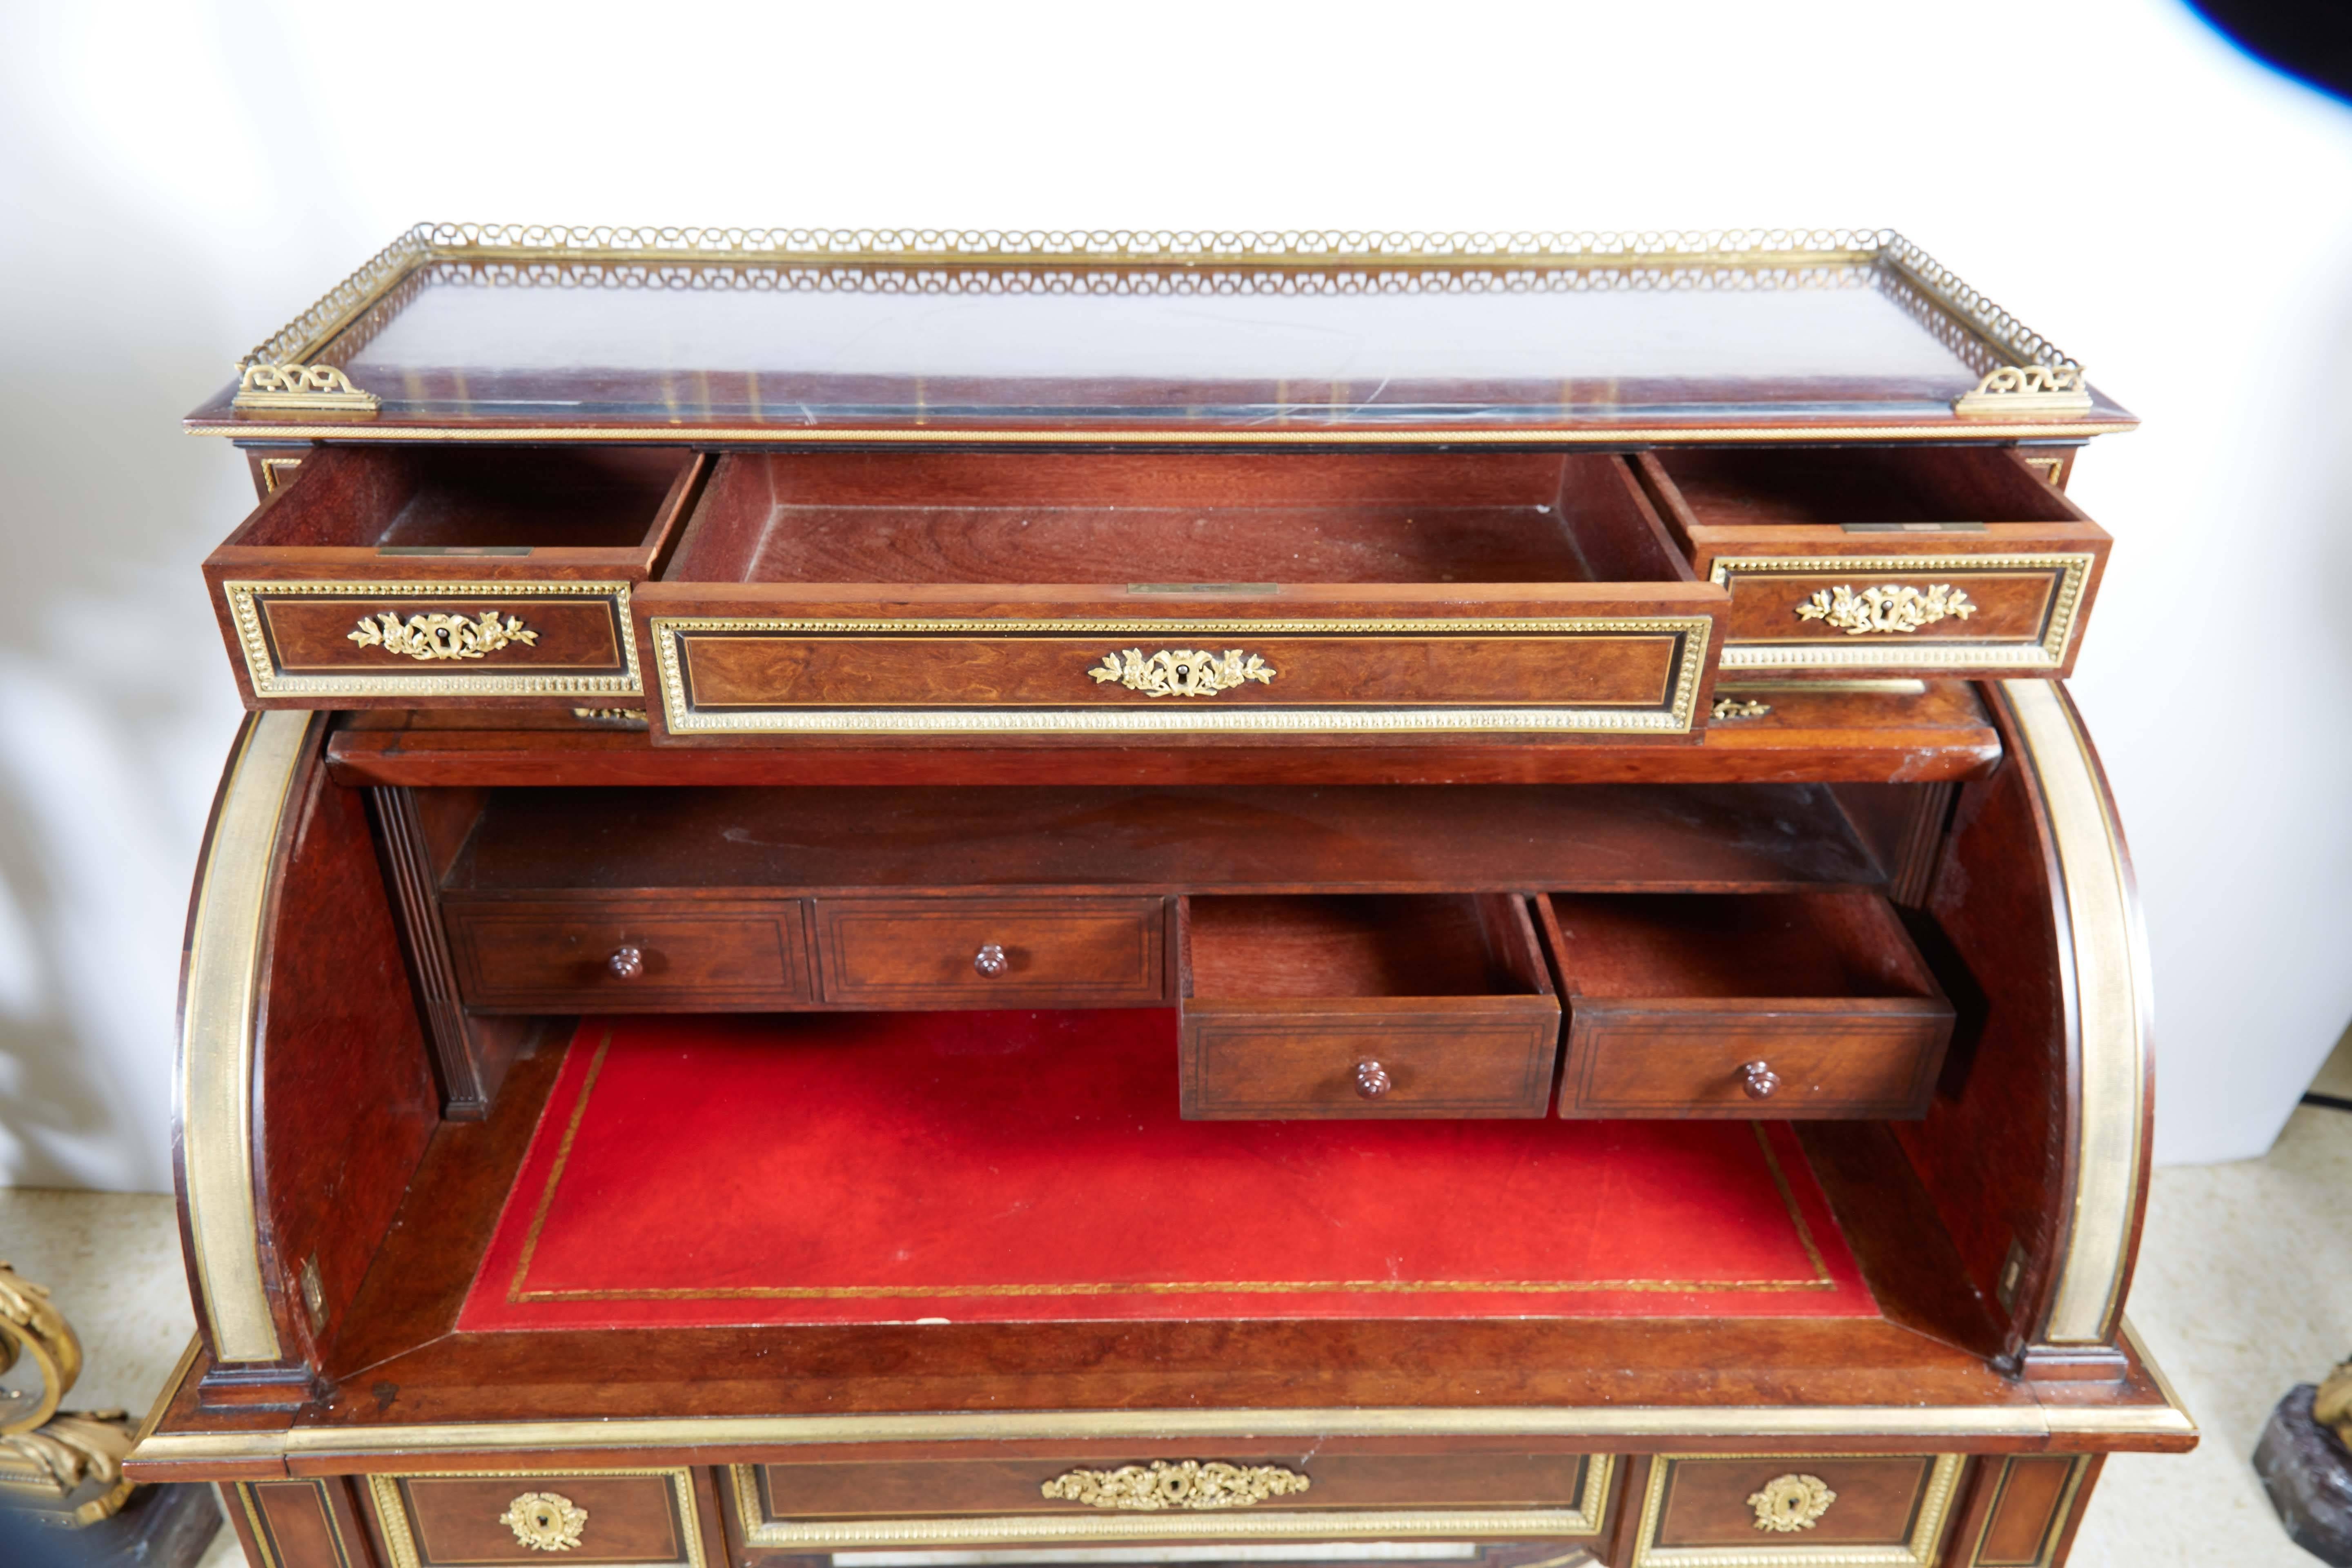 French ormolu-mounted bureau a cylindre roll top desk signed H. Fourdinois.

Veneered in walnut with very fine quality ormolu mounts throughout.

Stamped twice ''H. Fourdinois'' for maker Henri-Auguste Fourdinois (1830-1907).

The rectangular